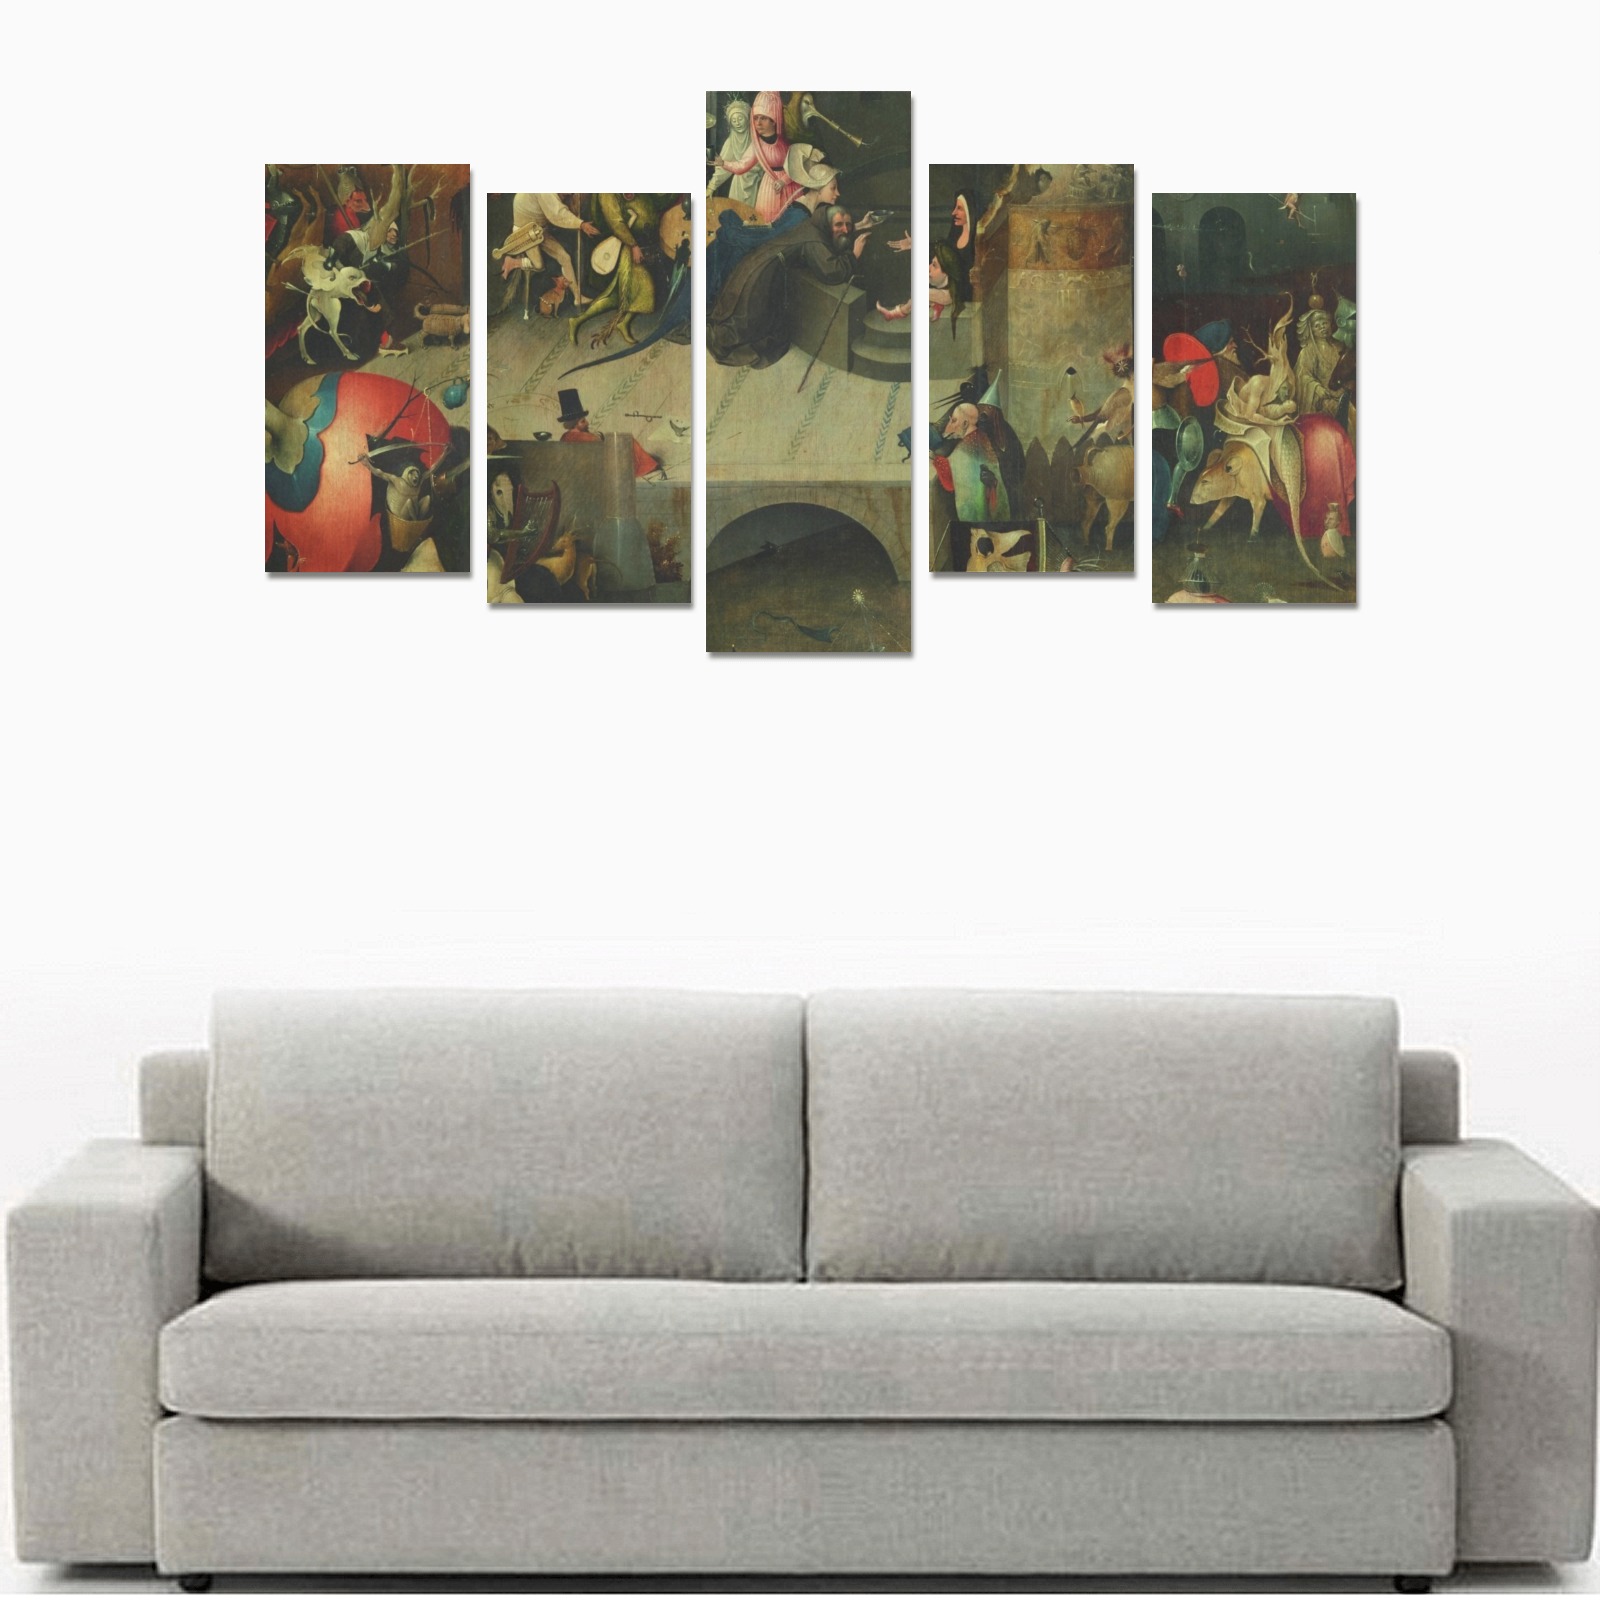 Hieronymus Bosch-The Temptation of St Anthony Canvas Print Sets E (No Frame)